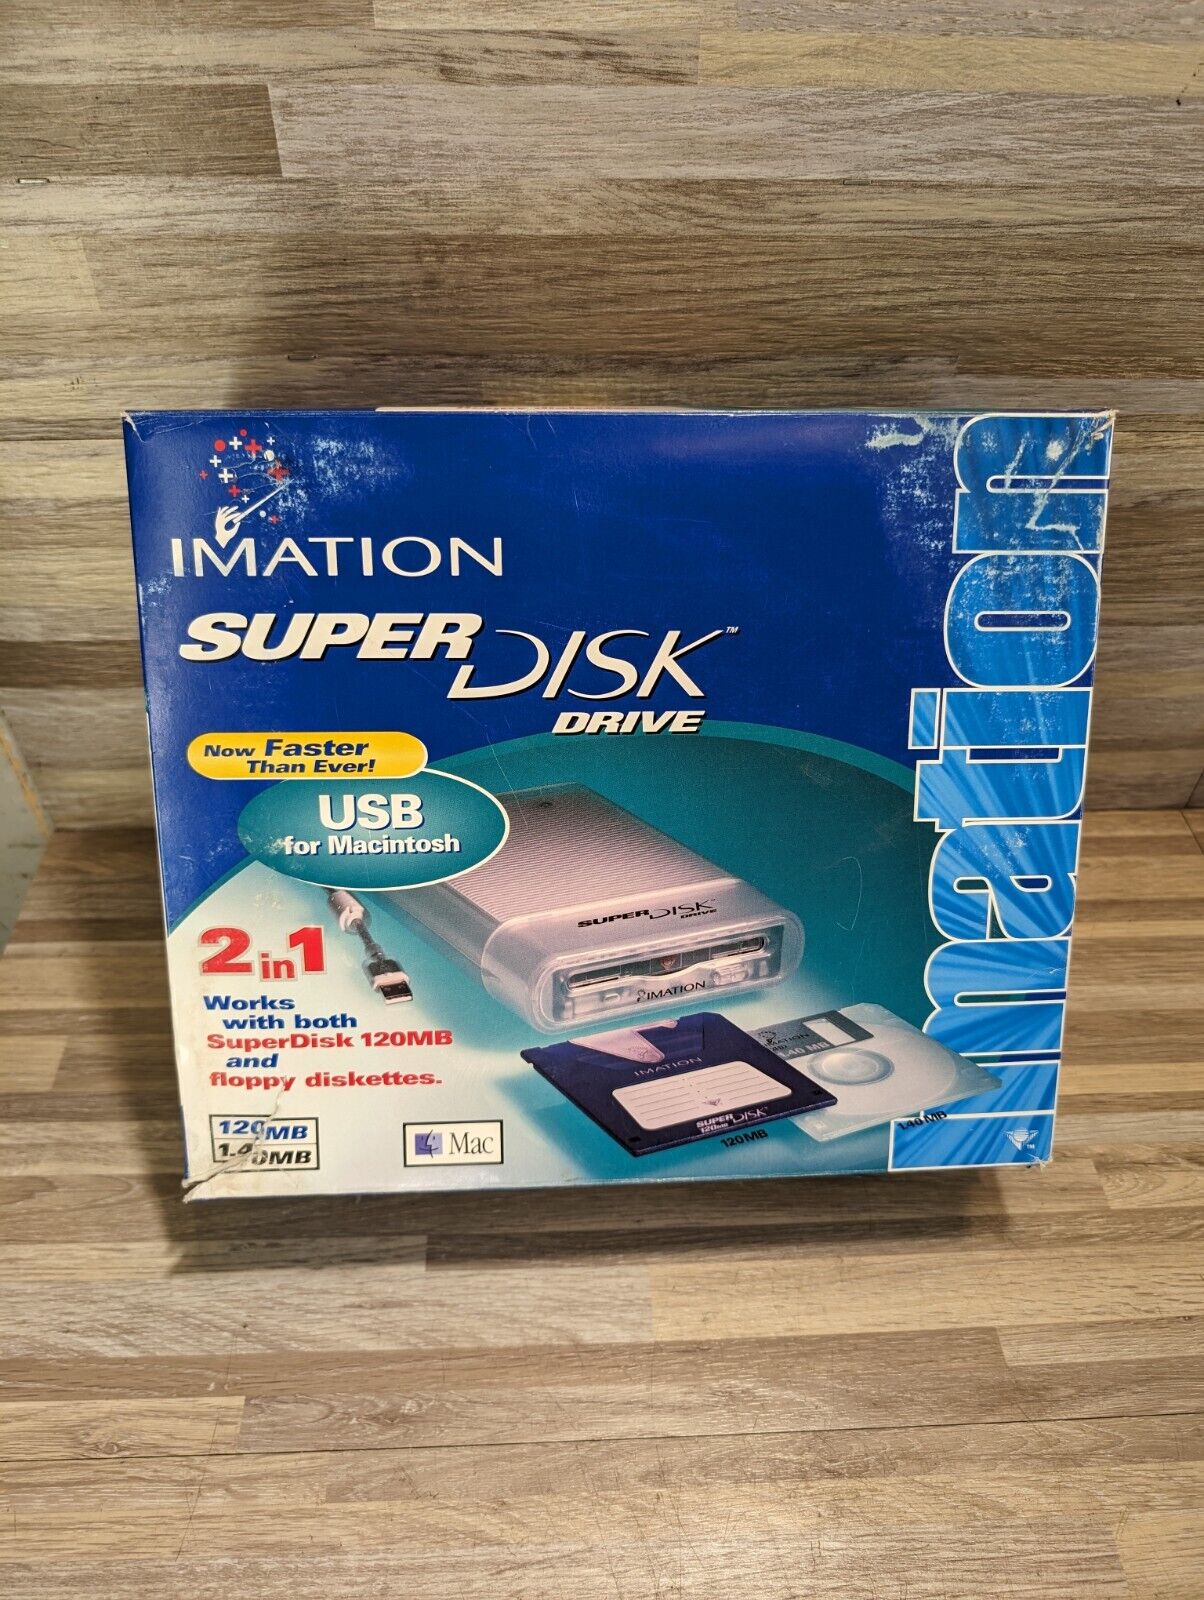 IMATION USB Drive for Macintosh and PC  120MB Superdisk and 1.4MB Floppy Disks